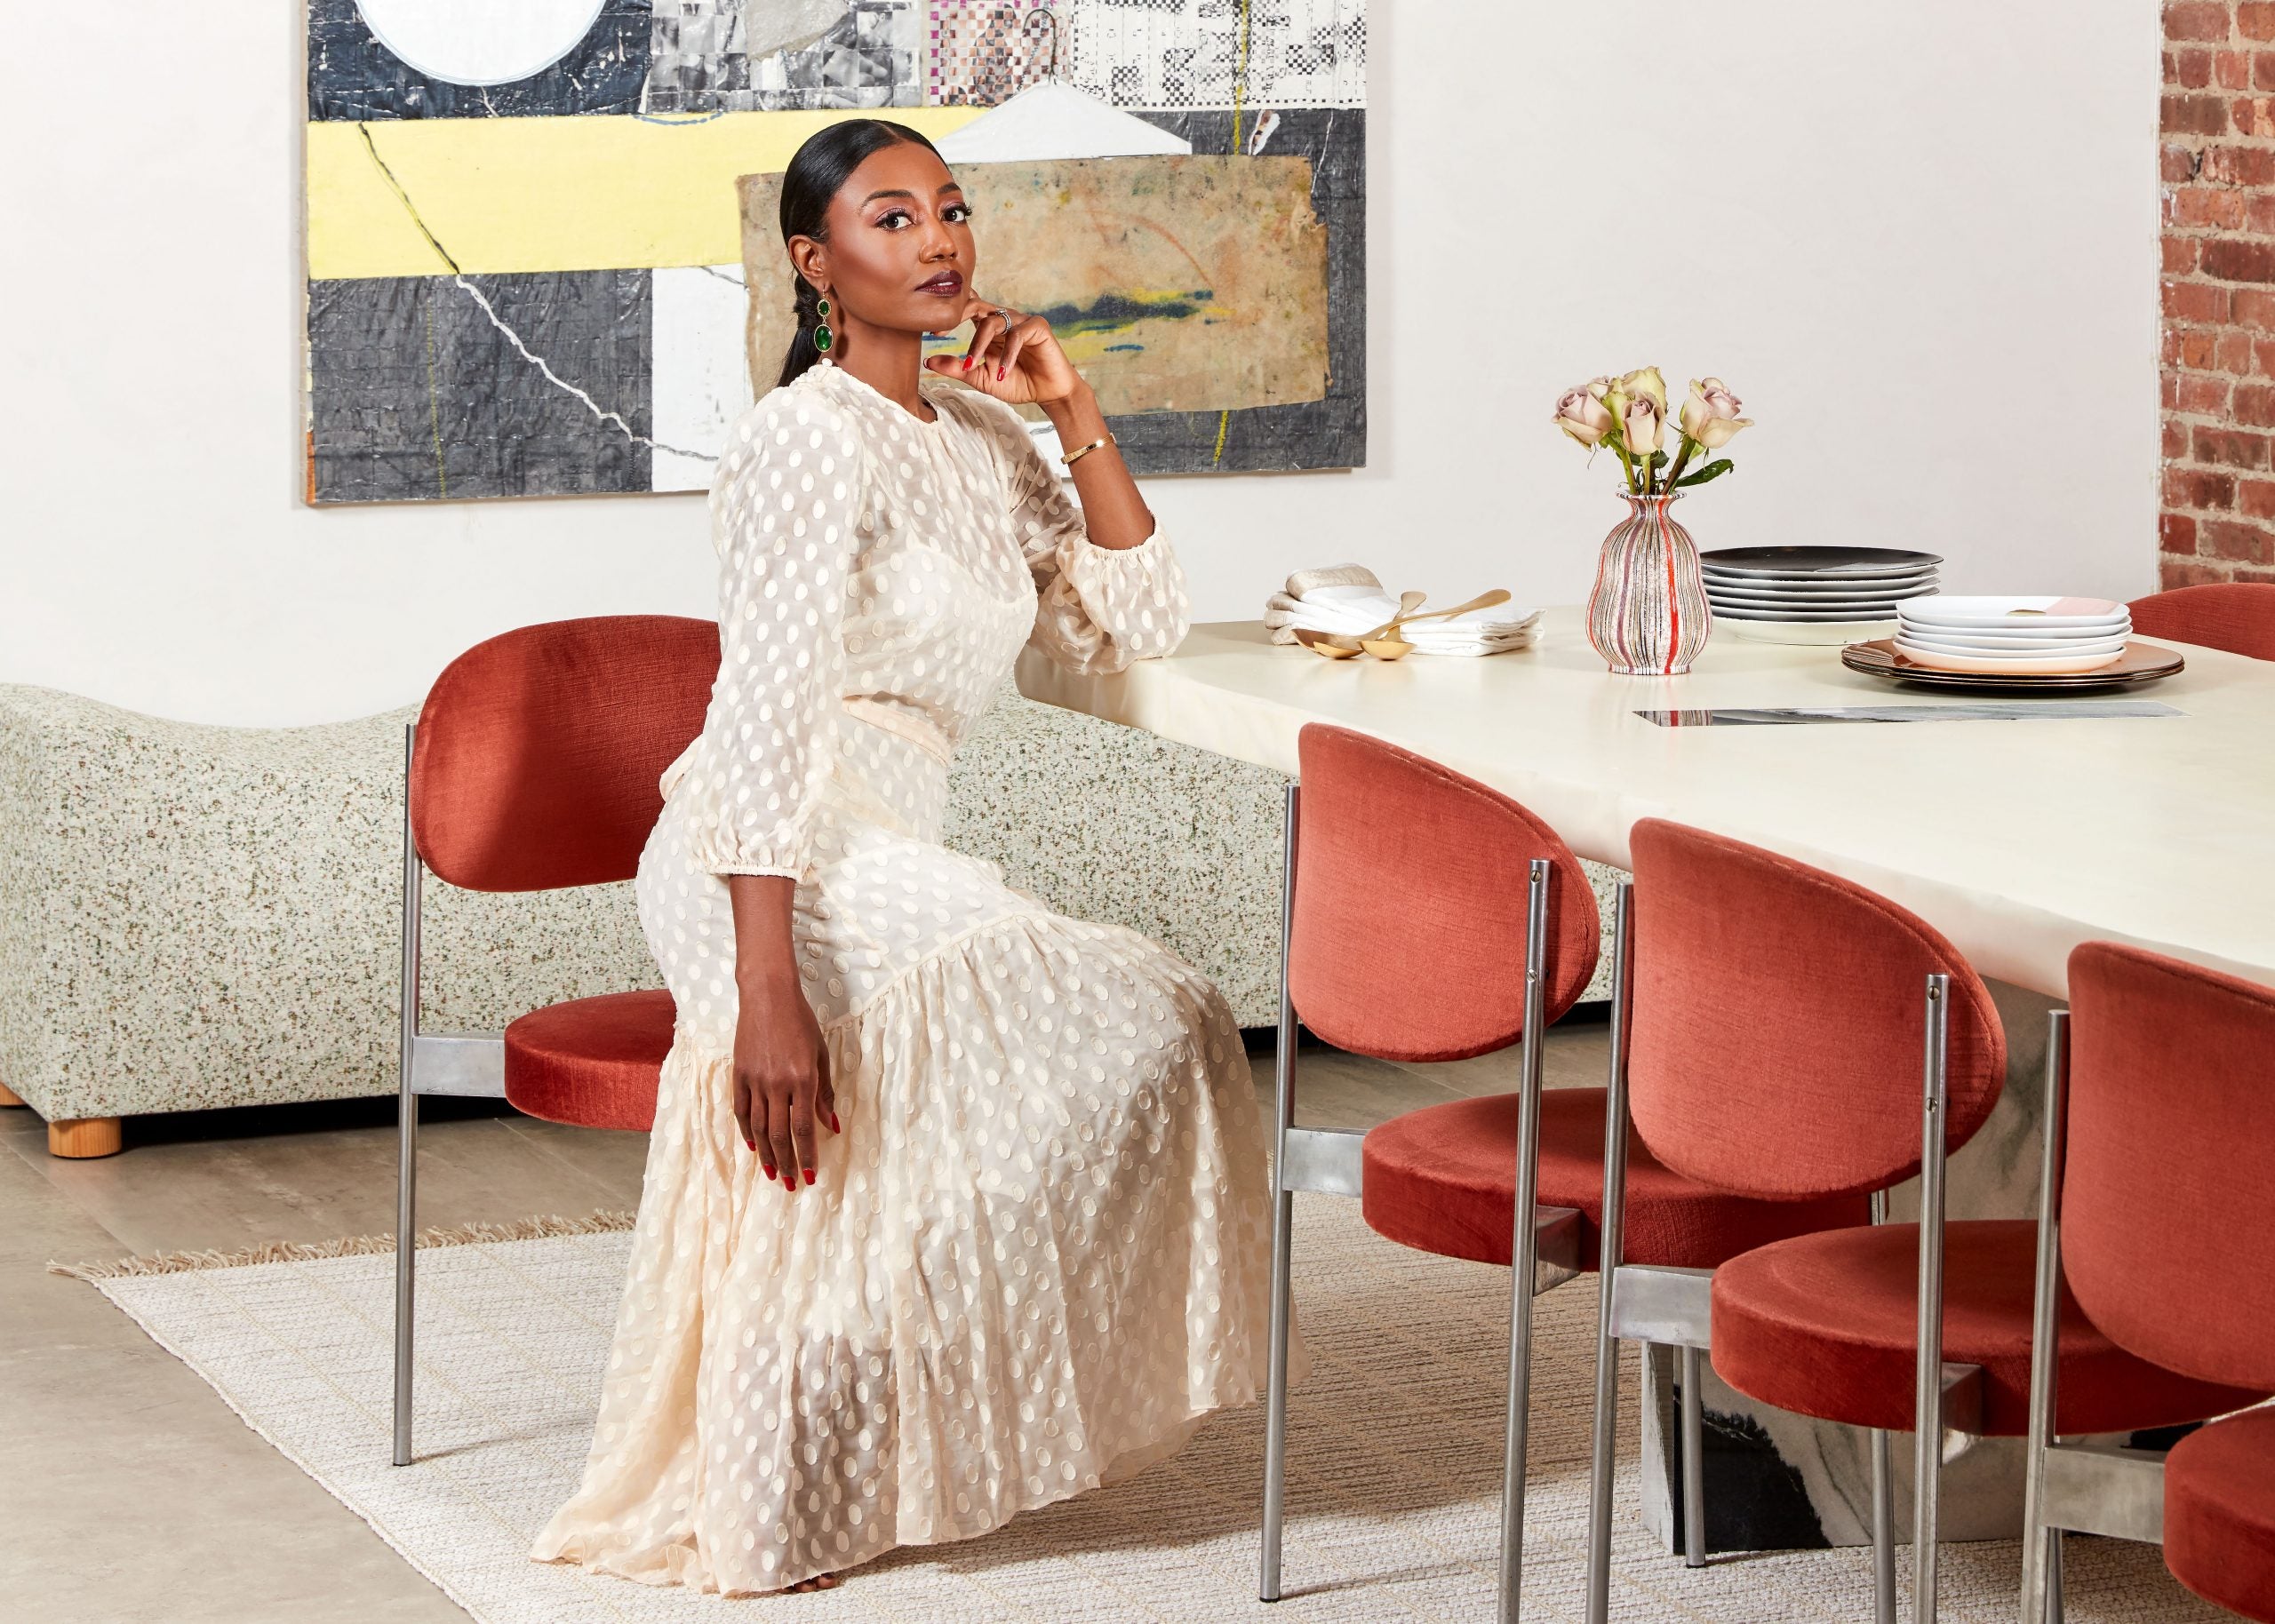 Raq From ‘Power Book III: Raising Kanan’ Has A Chic Manhattan Loft You Have To See